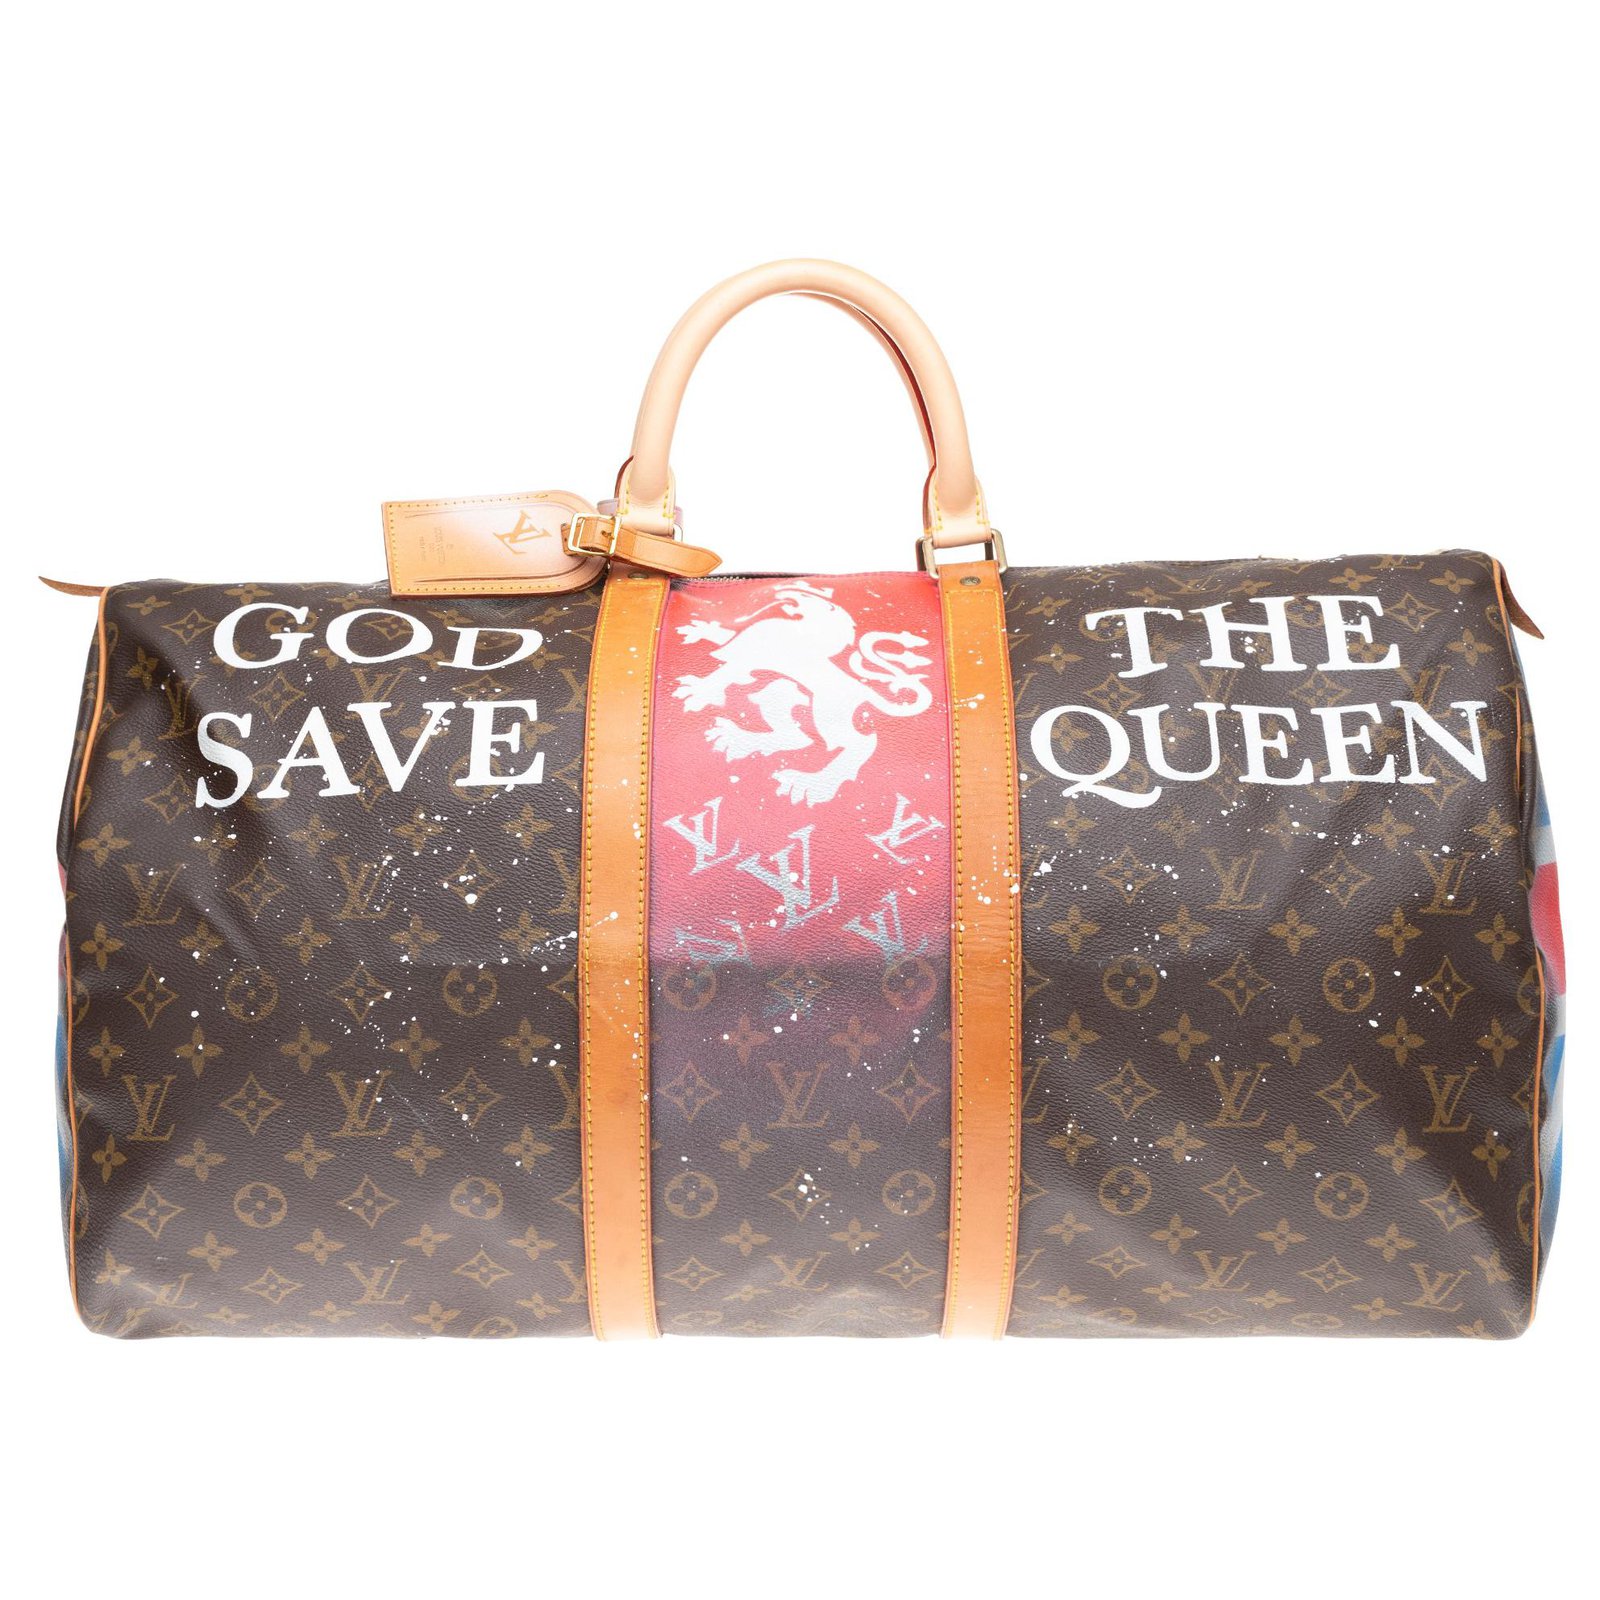 Louis Vuitton Keepall 55 Monogram God save the Queen customized